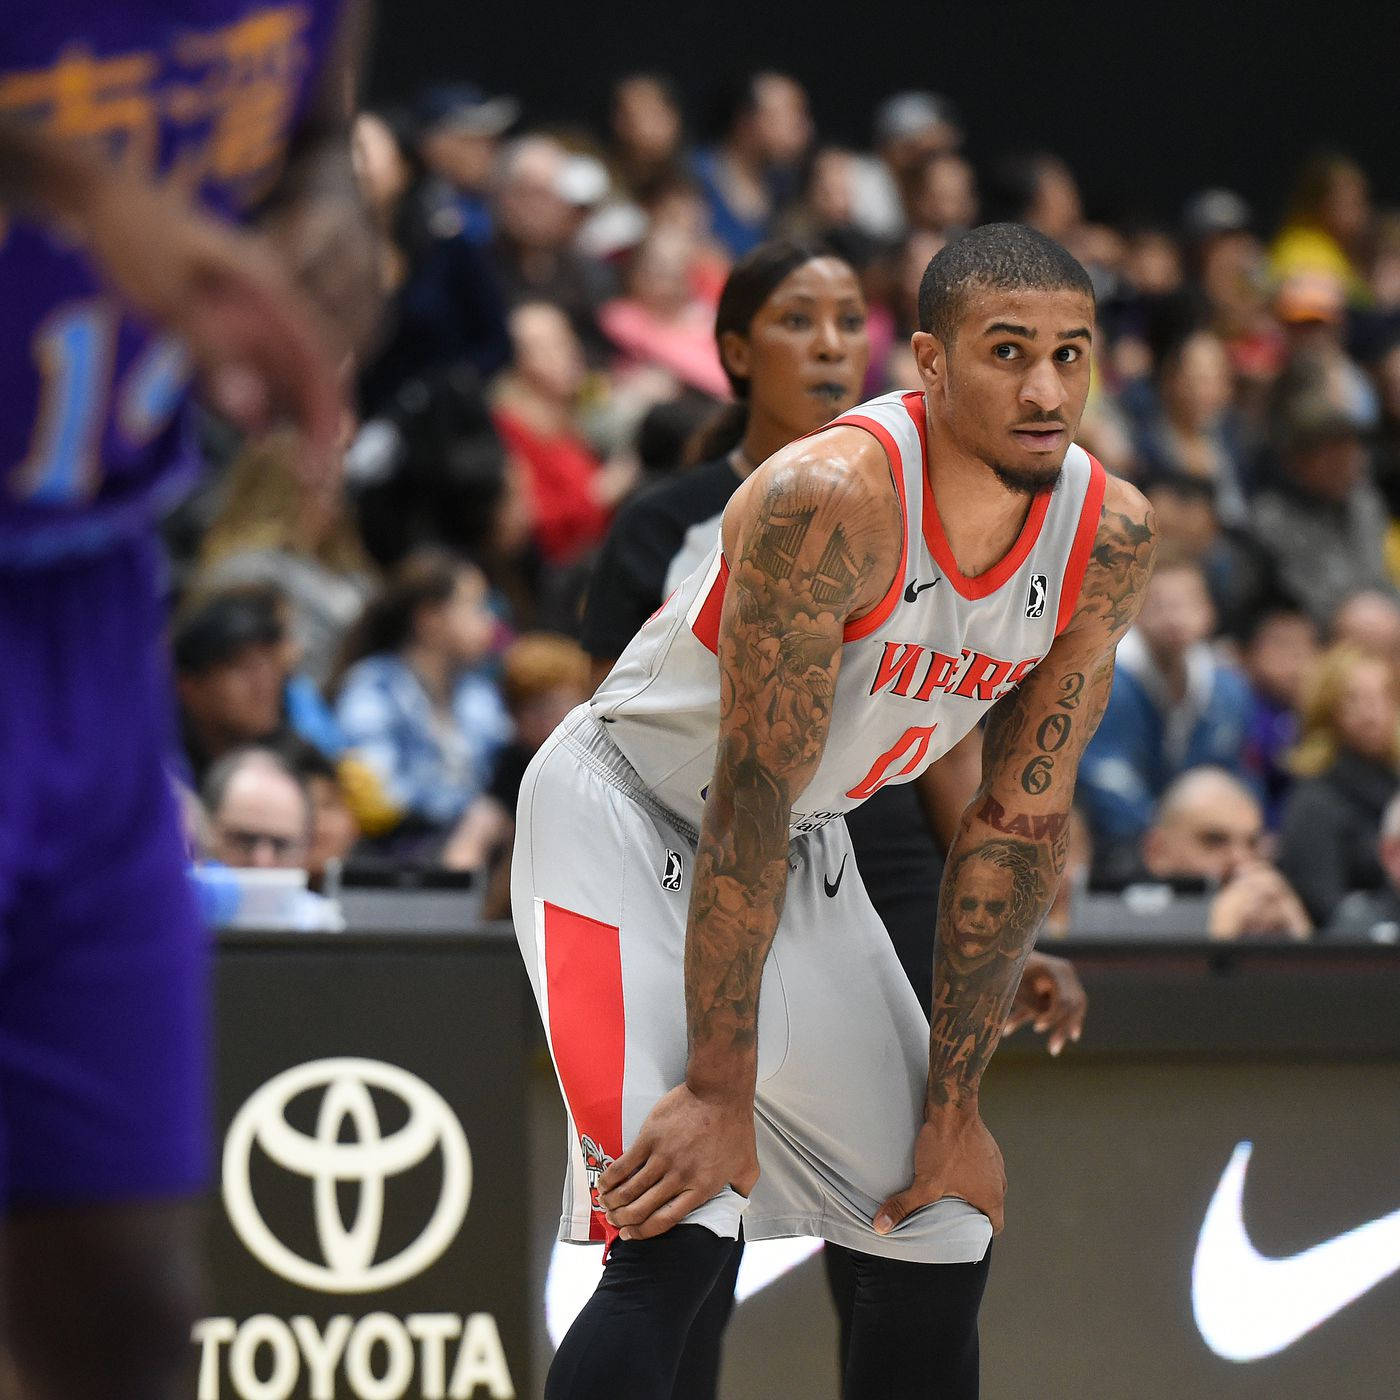 Goldenstate Warriors Gary Payton Ii Would Be Translated To: 